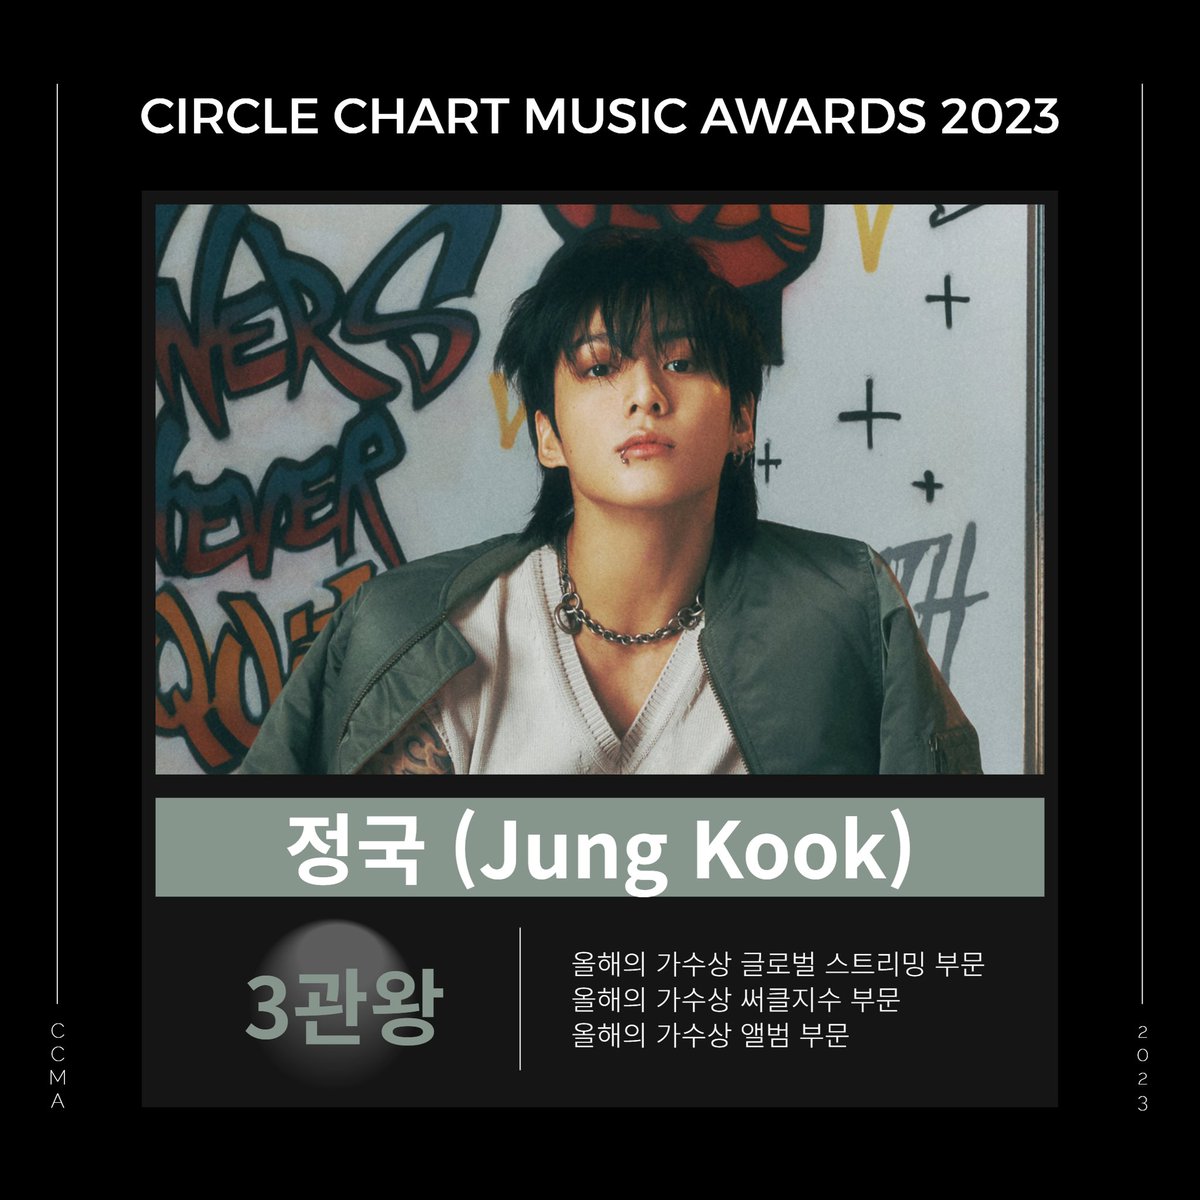 Congrats to Jungkook for winning 3 awards in the ‘Artist of the Year’ category at the Circle Chart Music Awards 2023! 🏆Artist of the Year - Album (Golden) 🏆Artist of the Year - Digital (Seven - Clean) 🏆Artist of the Year - Global Streaming (Seven - Explicit)